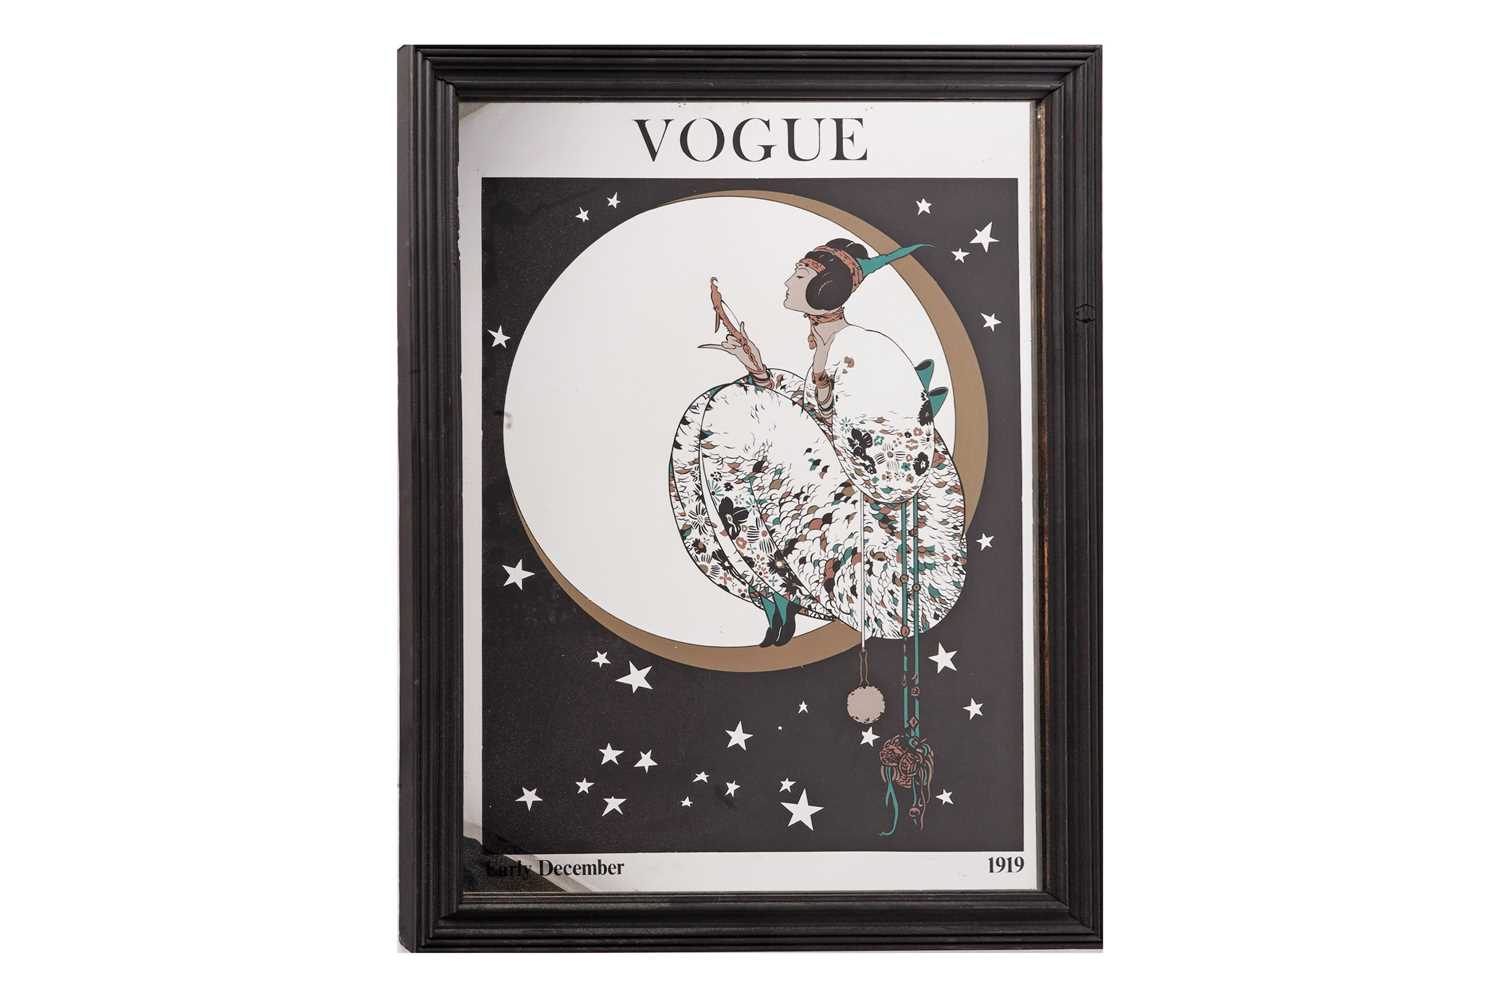 Lot 972 - An Art Deco style mirror decorated with Vogue December 1919 cover designed by George Wolfe Plank